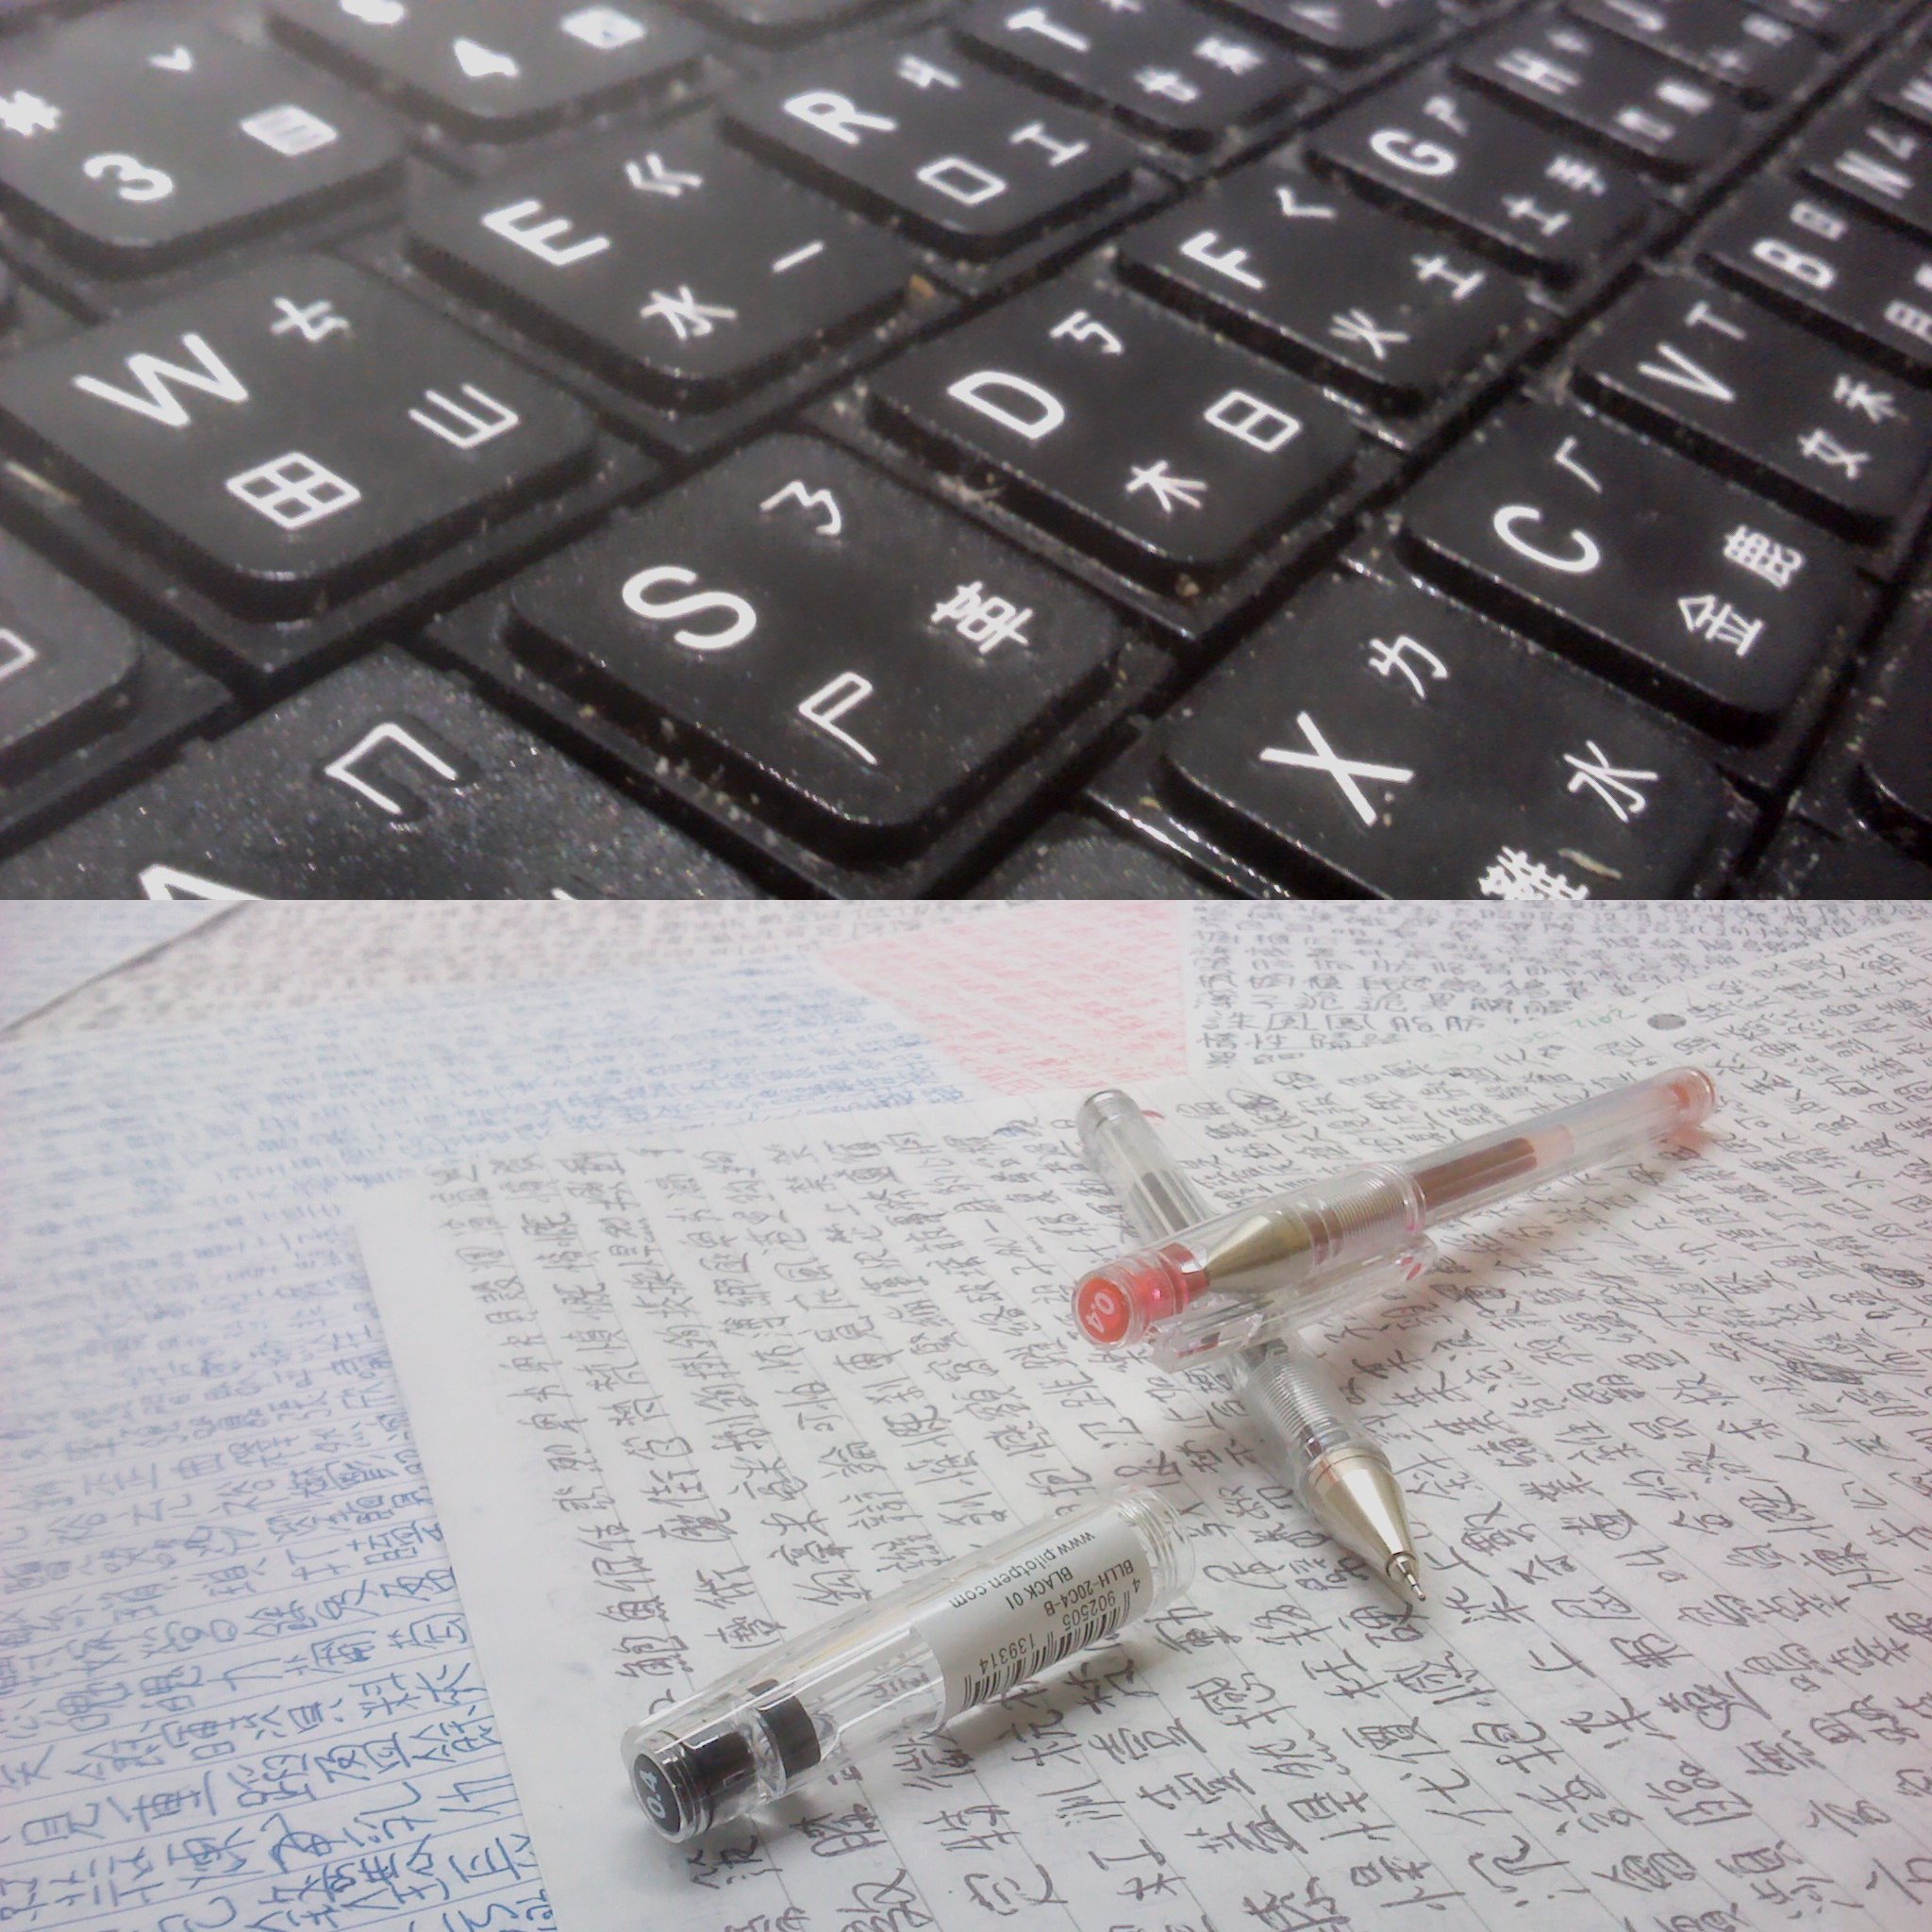 How to write chinese characters on word 2007